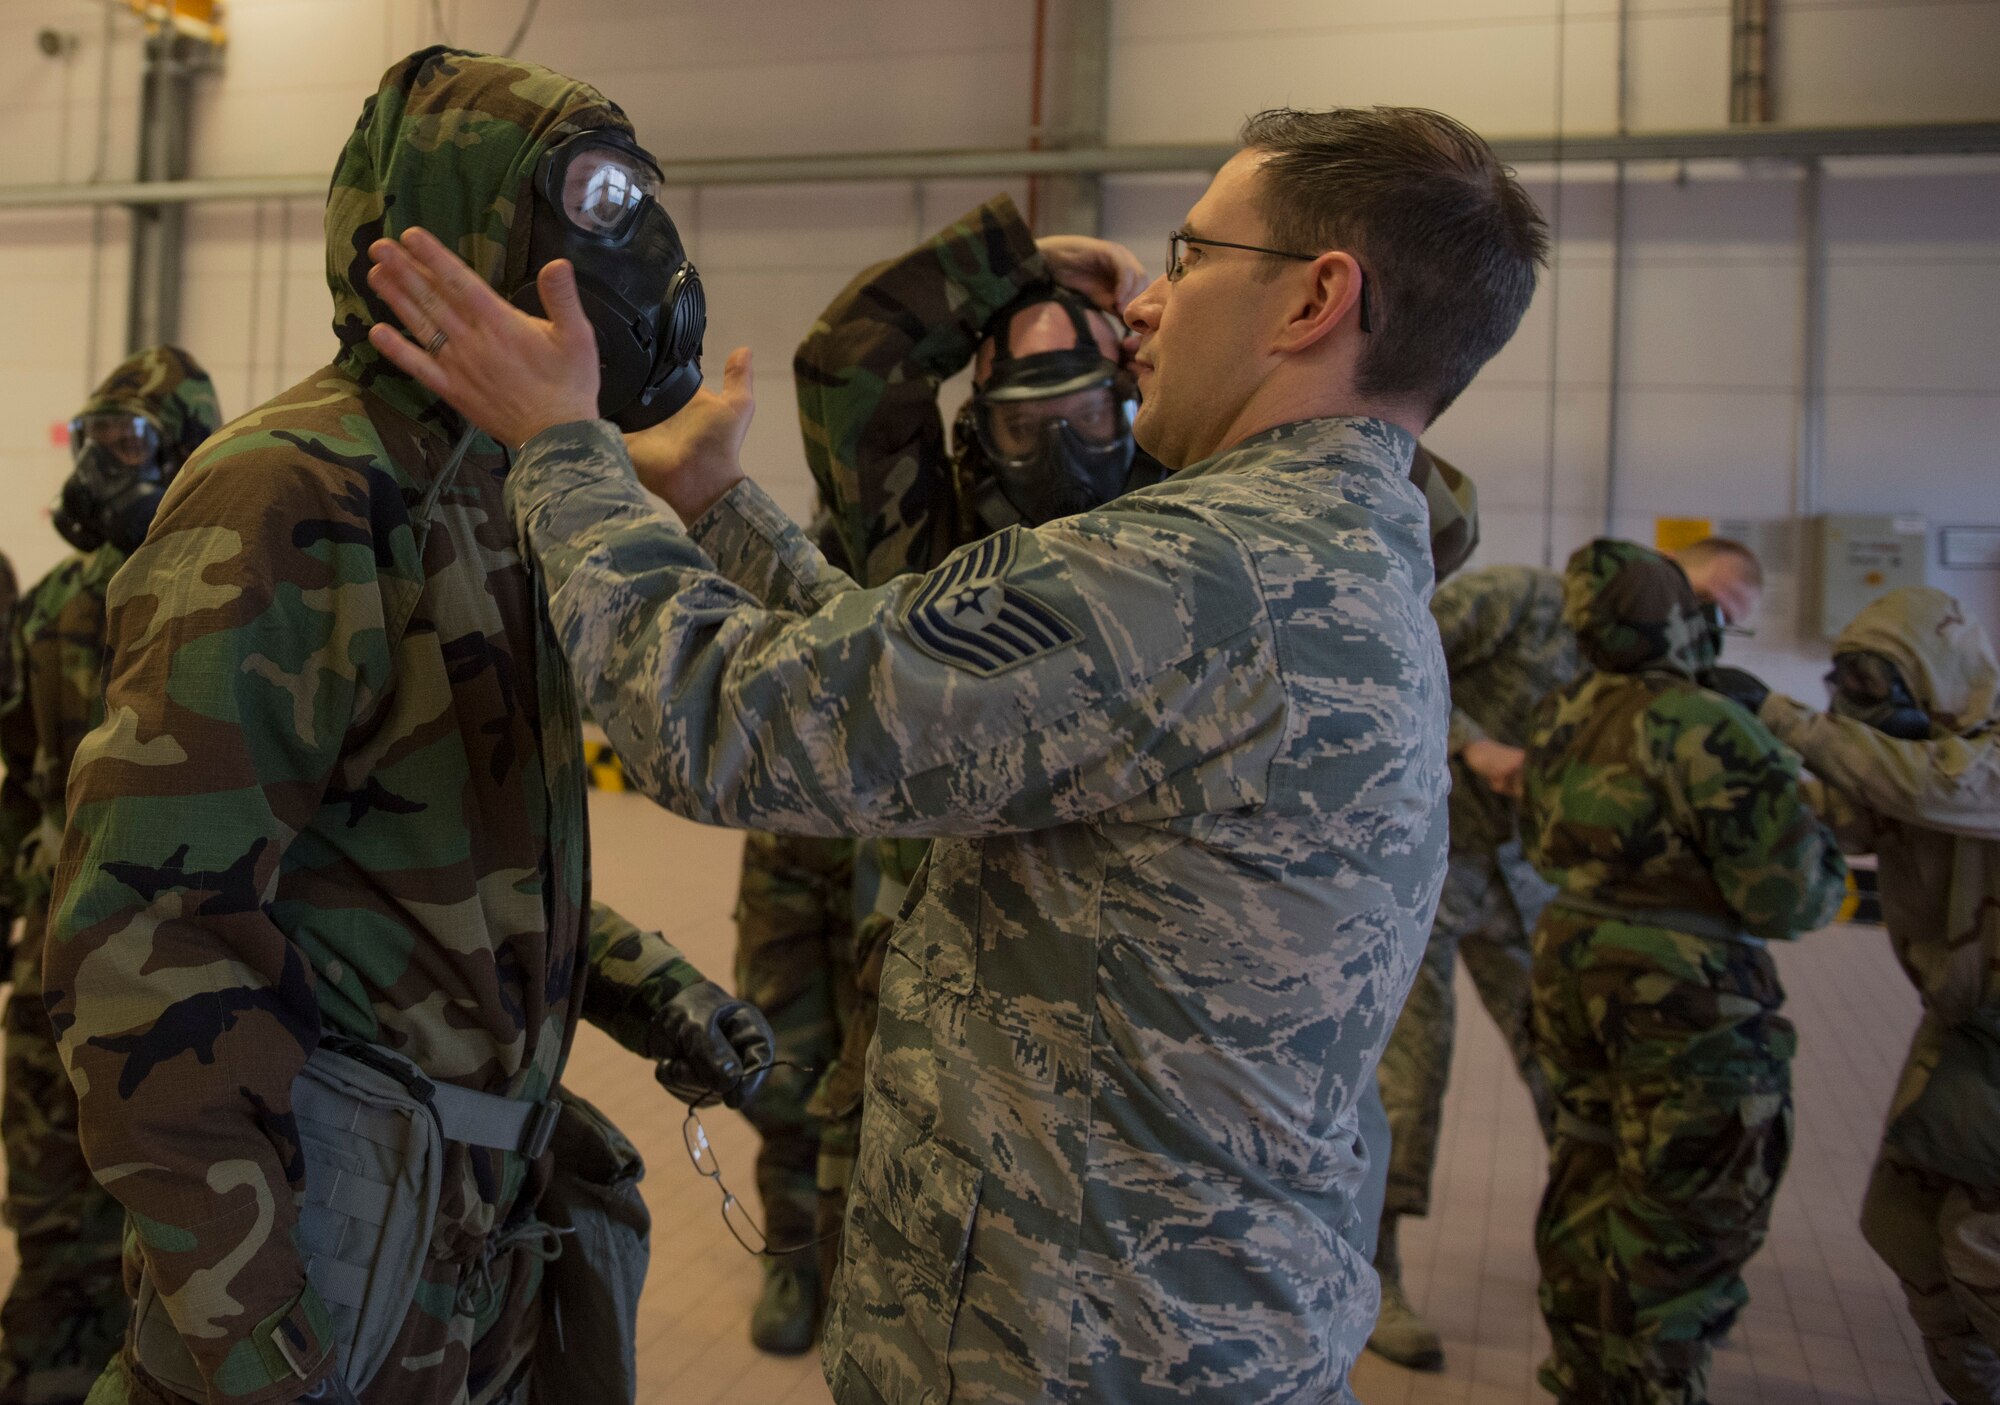 U.S. Air Force Tech. Sgt. Timothy Bennett, 52nd Civil Engineer Squadron emergency management craftsman, tests the seals on the M45 Land Warrior Chemical Biological Mask during Ability to Survive and Operate training at Spangdahlem Air Base, Germany, March 8, 2018. With a high level of importance placed on the ability to respond to external threats quickly and effectively, the 52nd CES conducted refresher training for everyone from the most novice Airmen to the most combat-experienced Chief. (U.S. Air Force photo by Airman 1st Class Jovante Johnson)